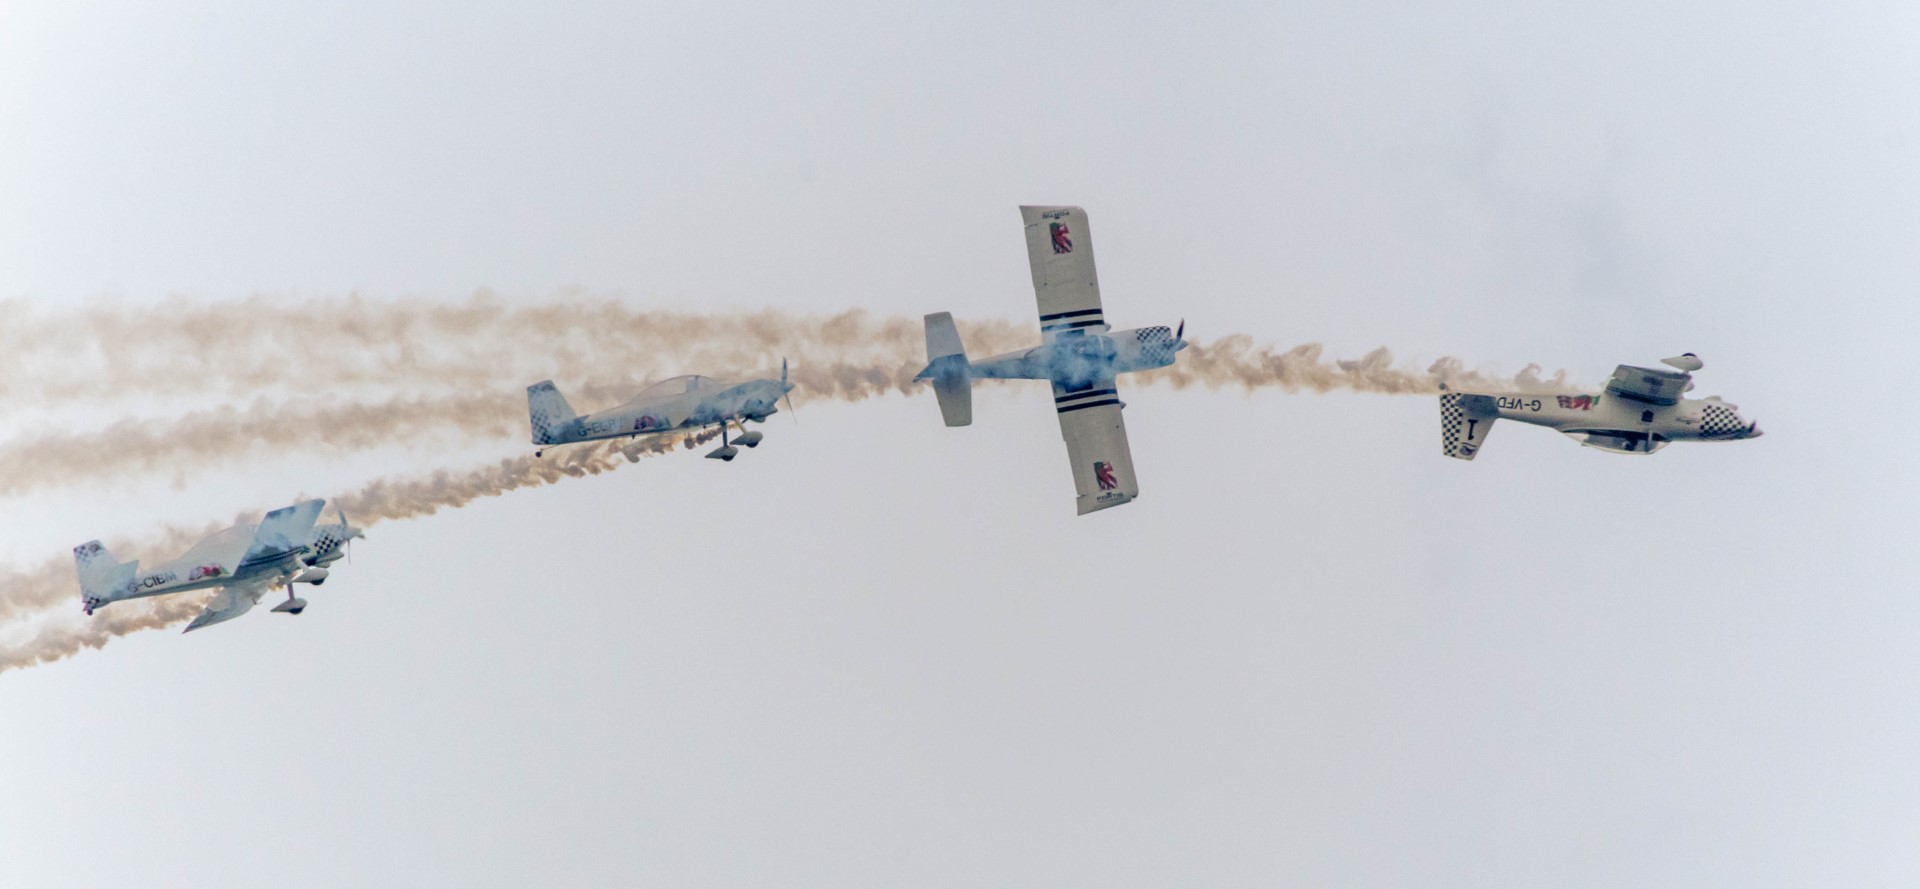 Four airplanes performing a roll at an airshow